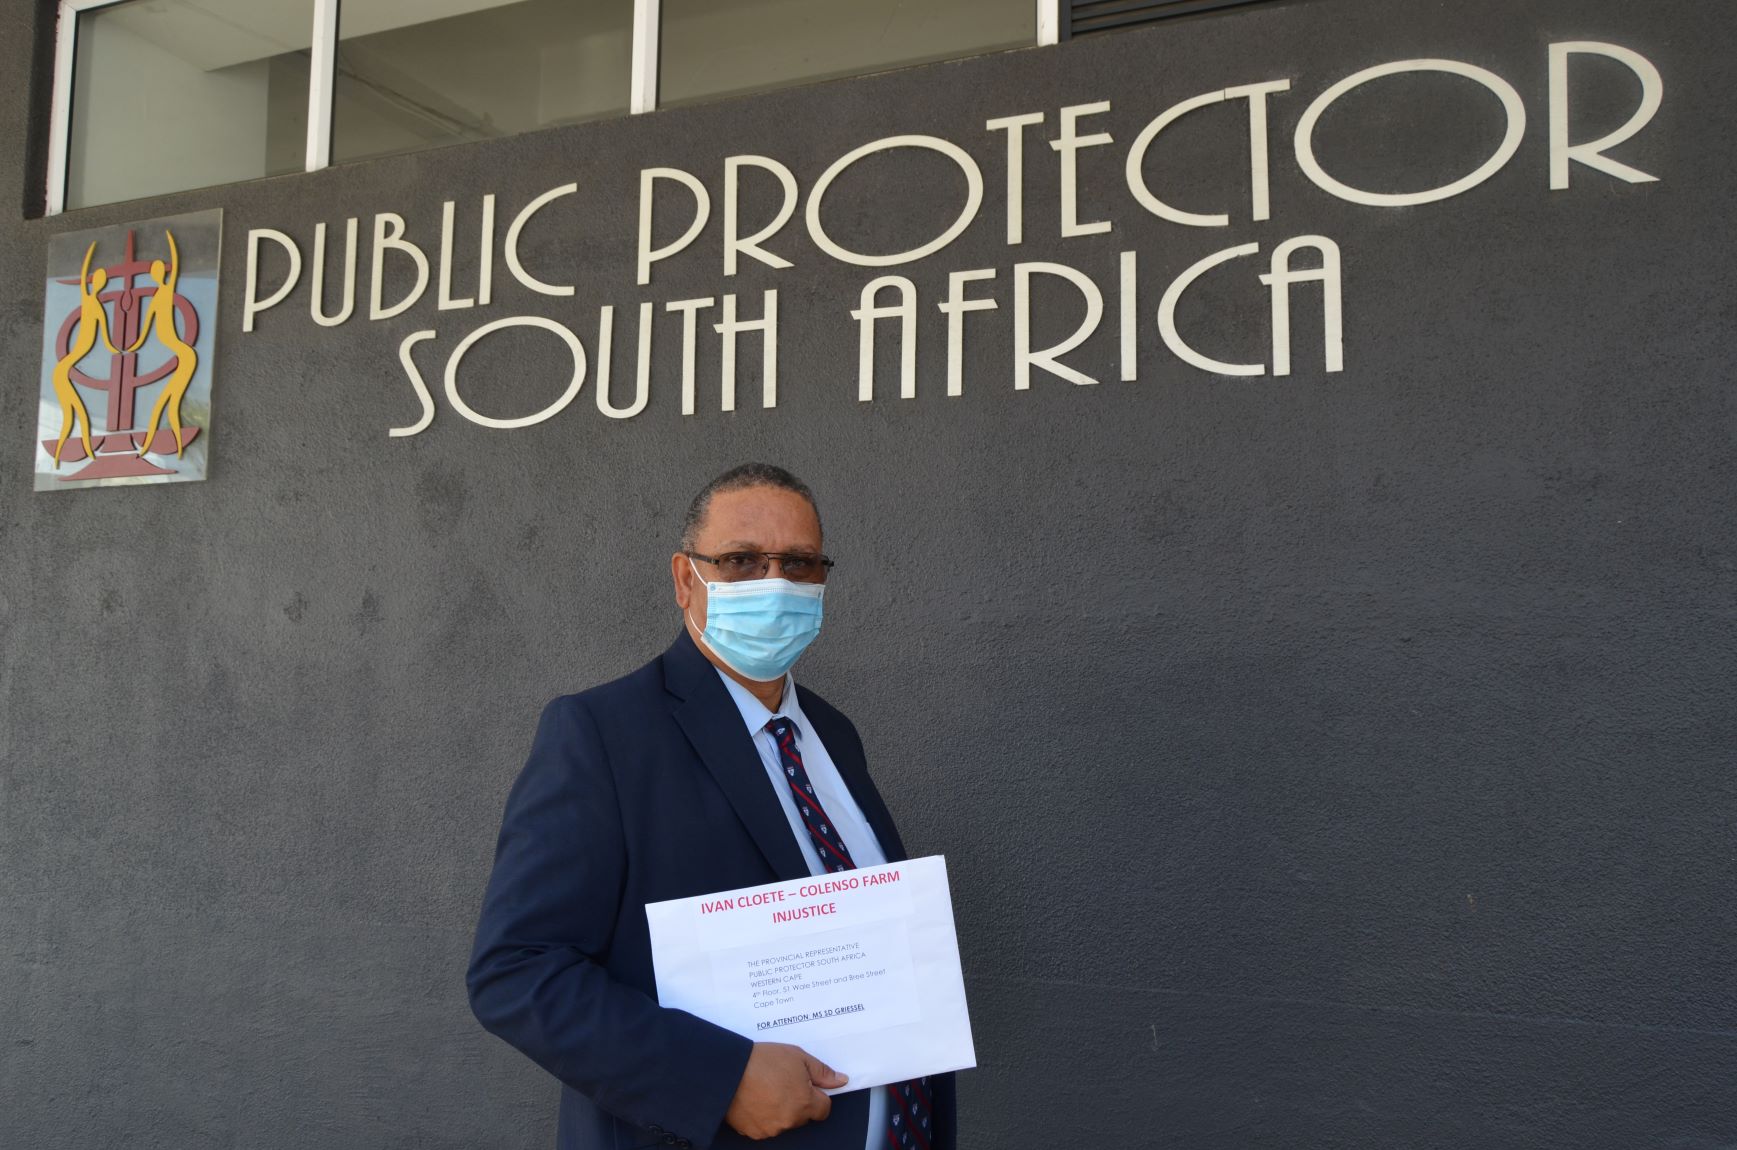 Minister Ivan Meyer at the entrance to the office of the Public Protector